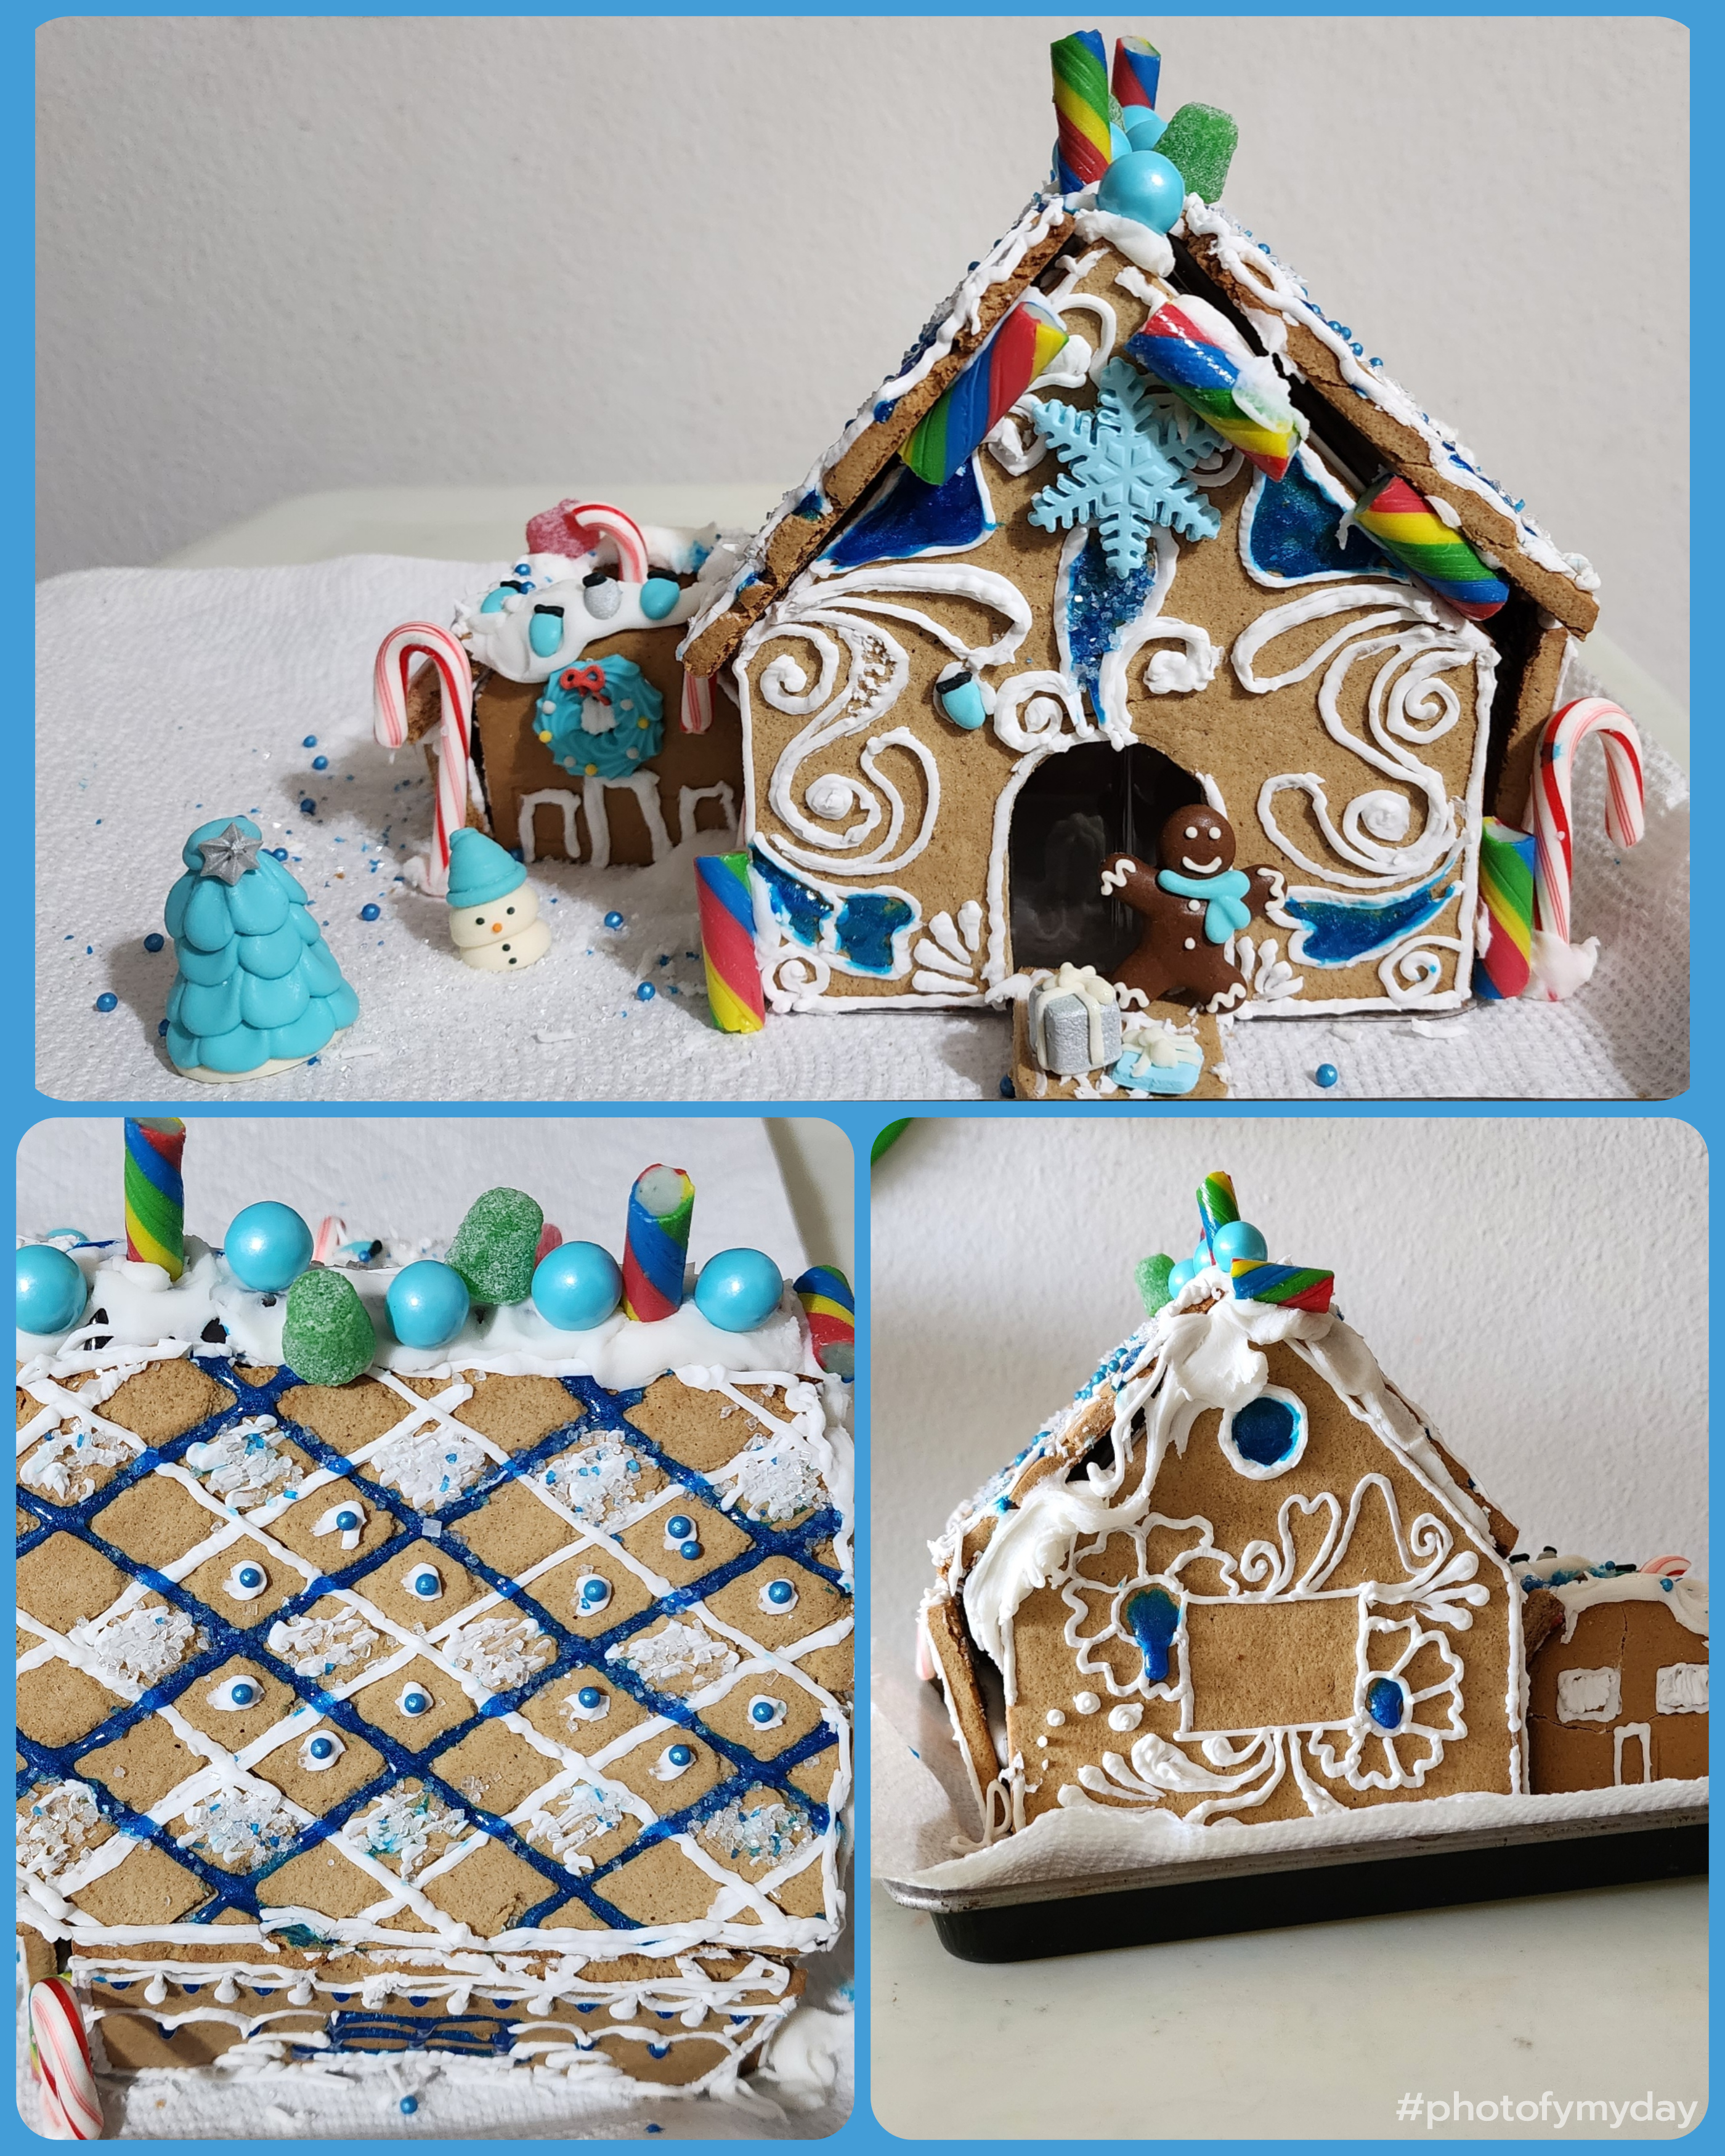 Three photos show a gingerbread house with rainbow candy and blue geometric pattern on the roof.